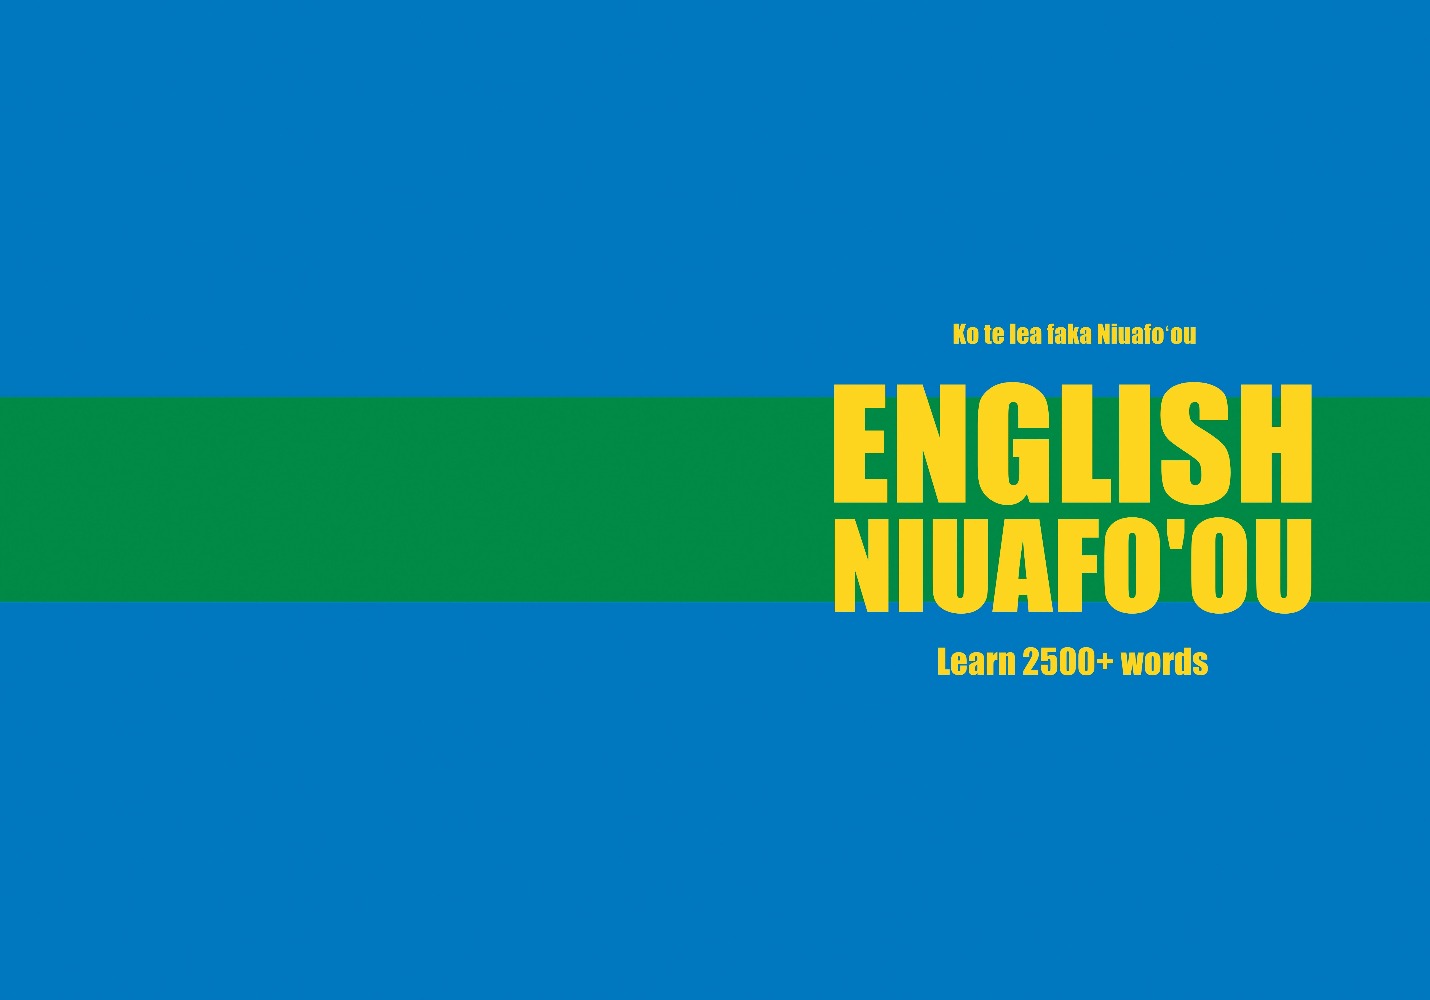 Niuafo'ou language learning notebook cover